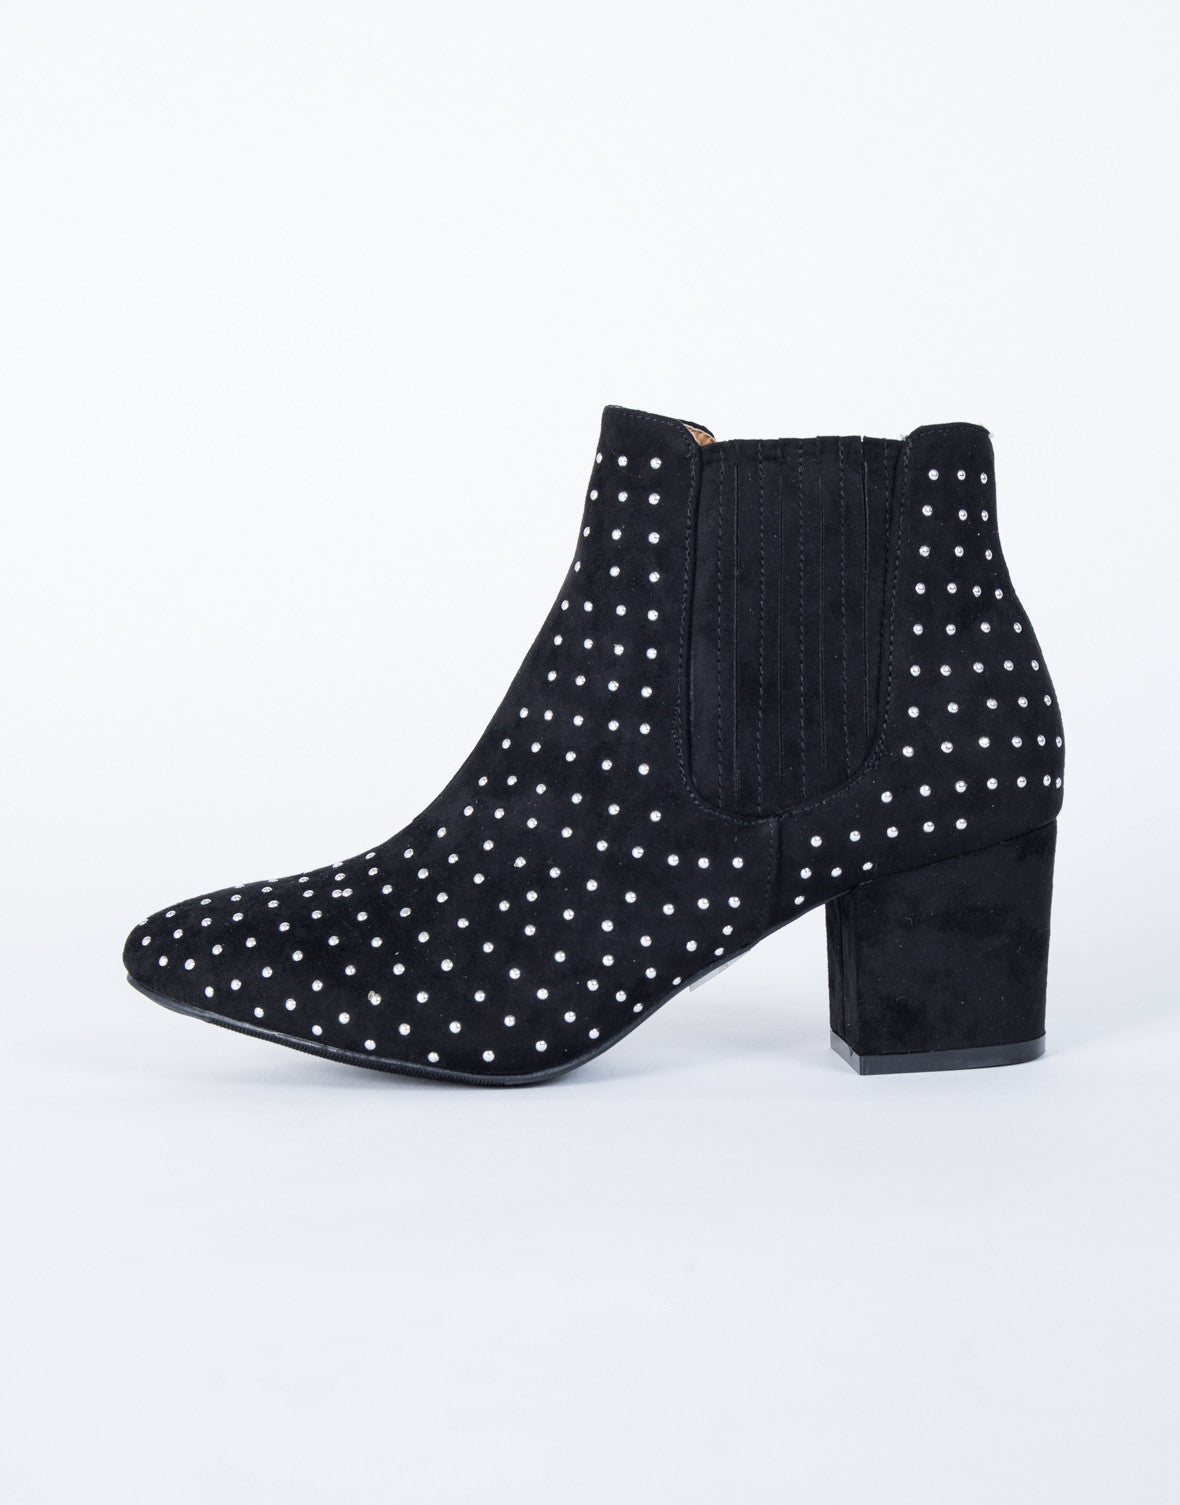 Low Rider Studded Booties - Black Suede 